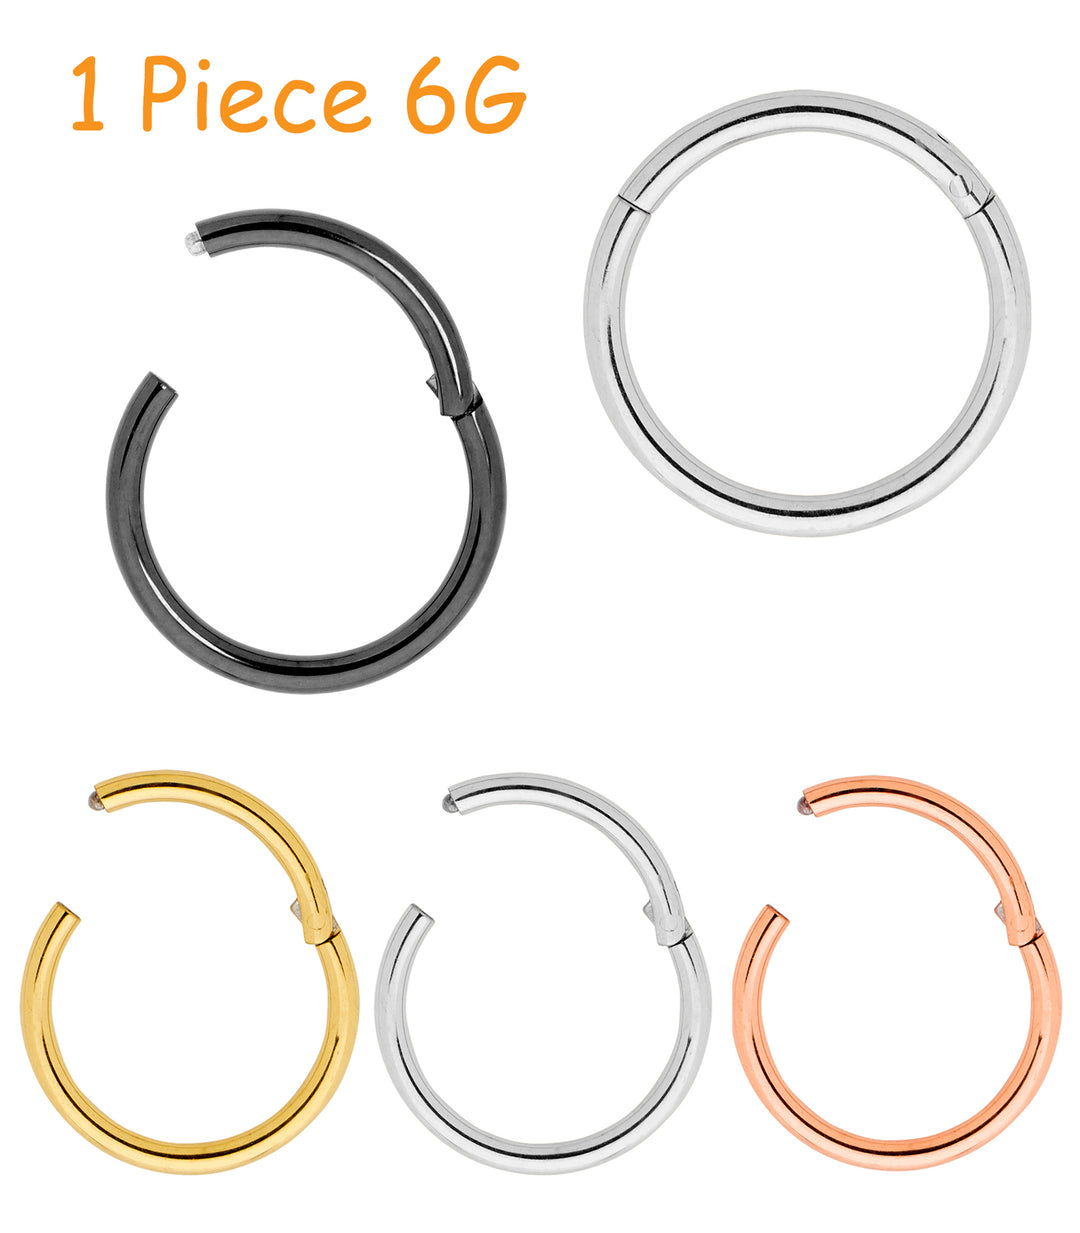 1 Piece 6G (thickest) Stainless Steel Polished Hinged Hoop Segment Nose Ring Piercing Earring 14mm - 20mm - PFGWholesale